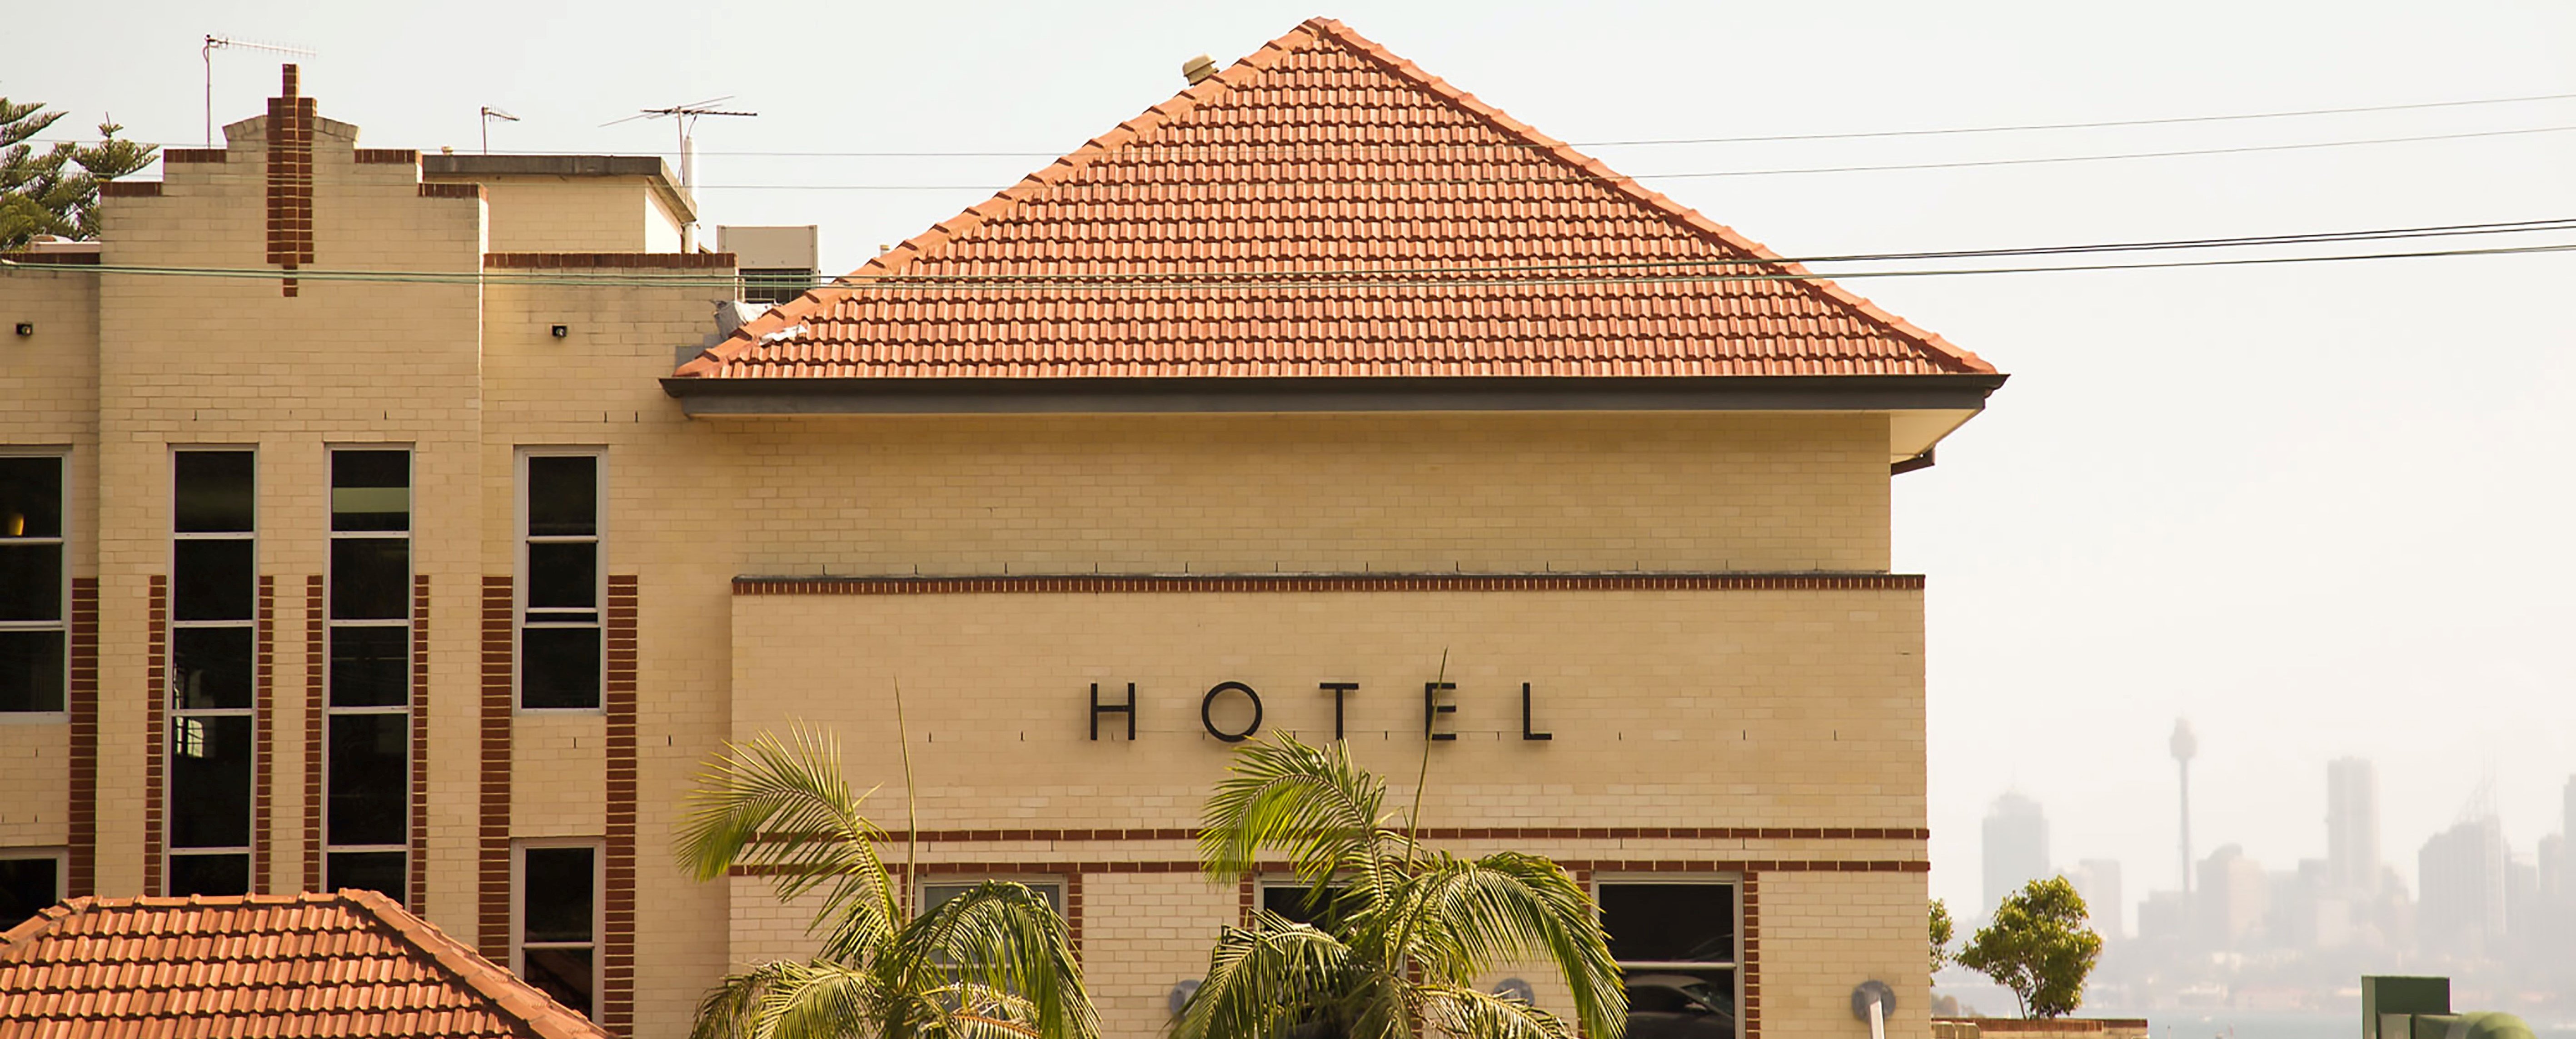 6 Ways Independent Hotels Can Compete With Large Hotel Chains in Terms of Sustainability